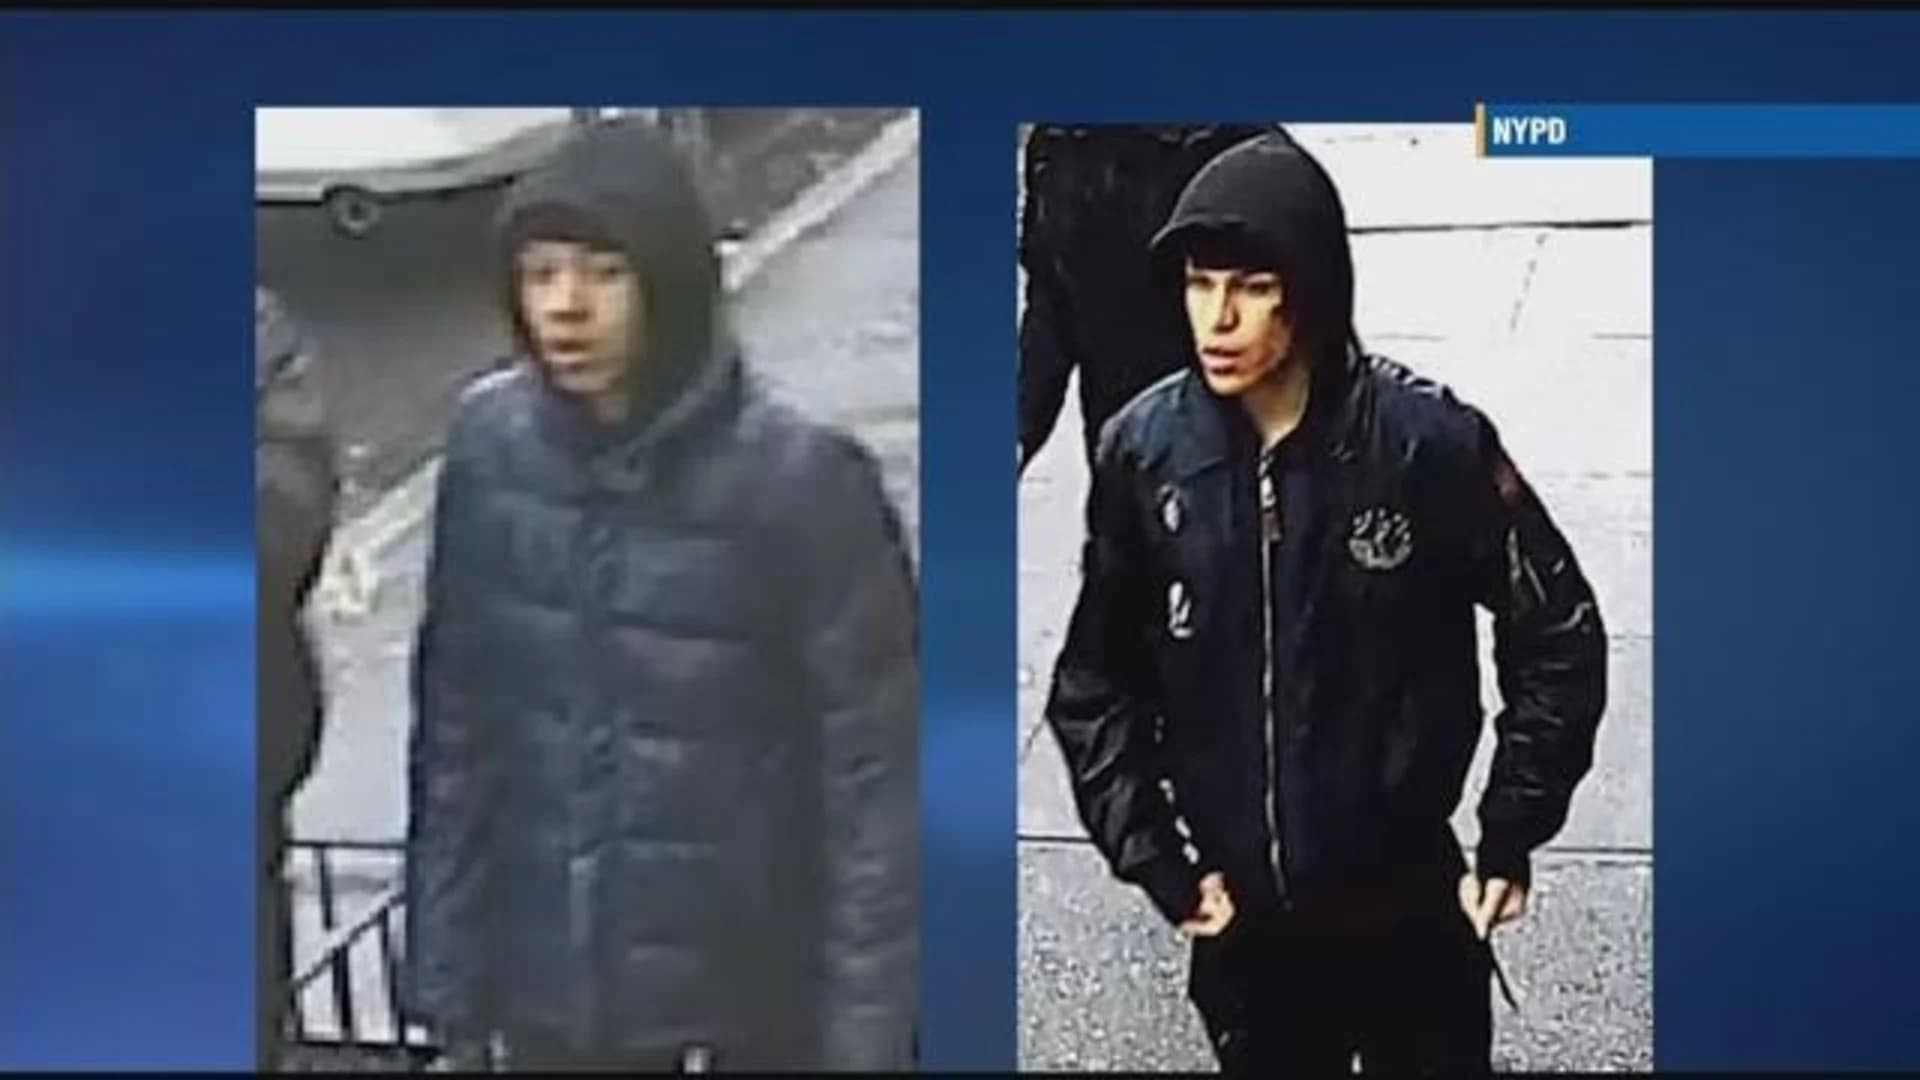 Photos released of 2 men wanted for shooting 16-year-old in the head in Mott Haven